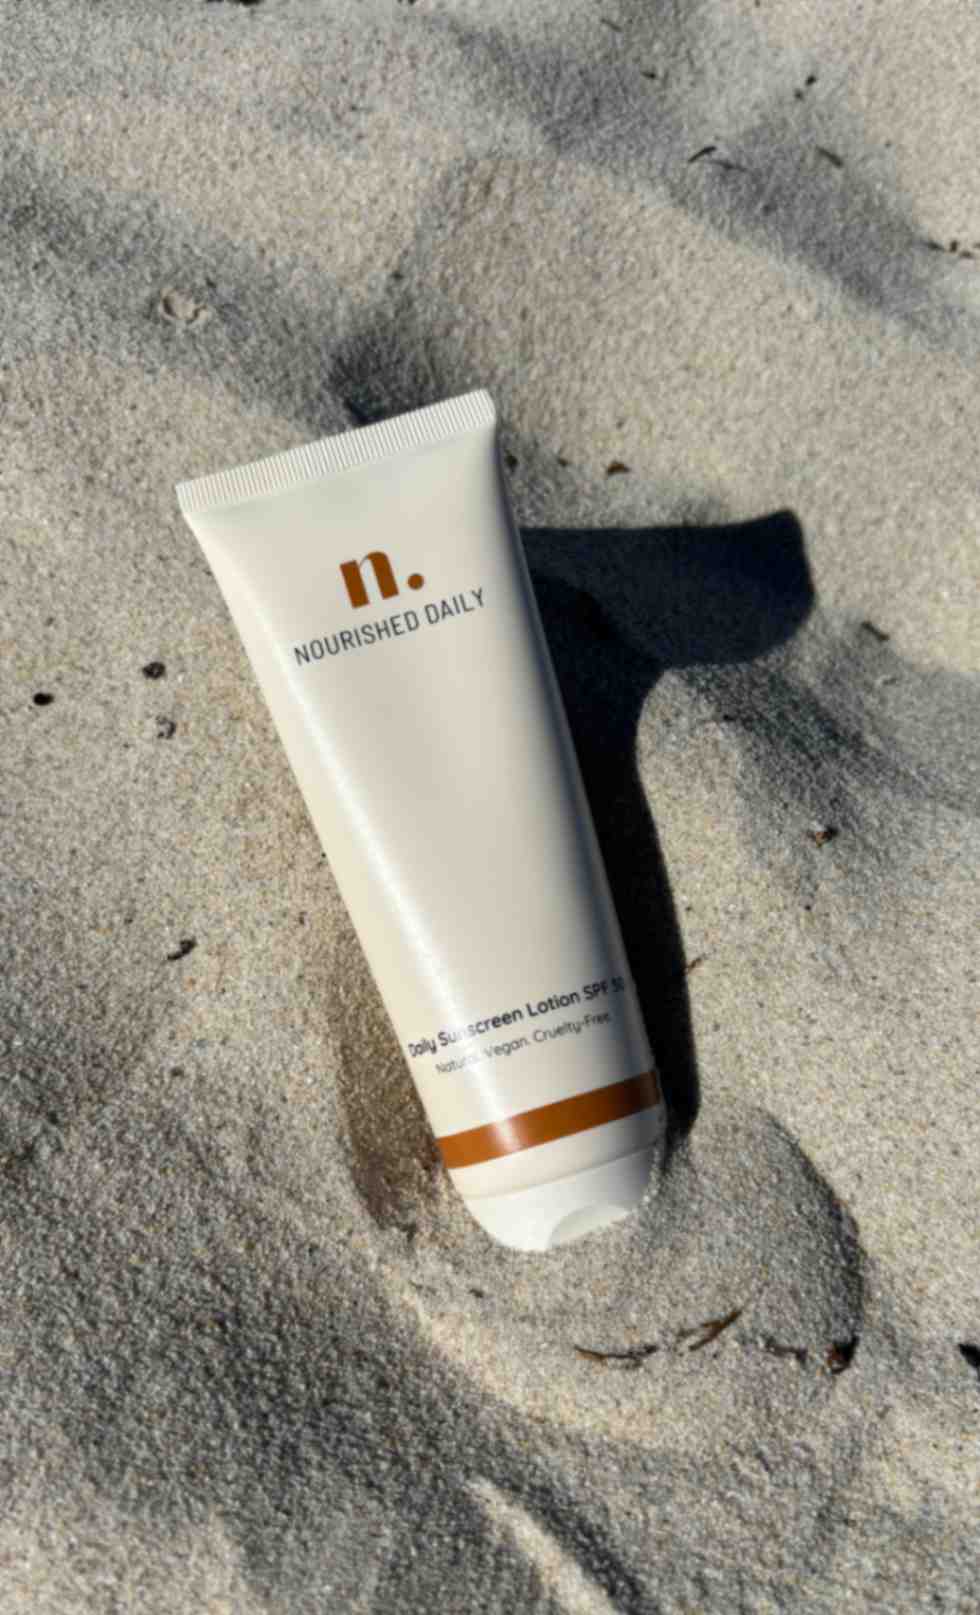 Radiant protection: the newest Nourished Daily sunscreen